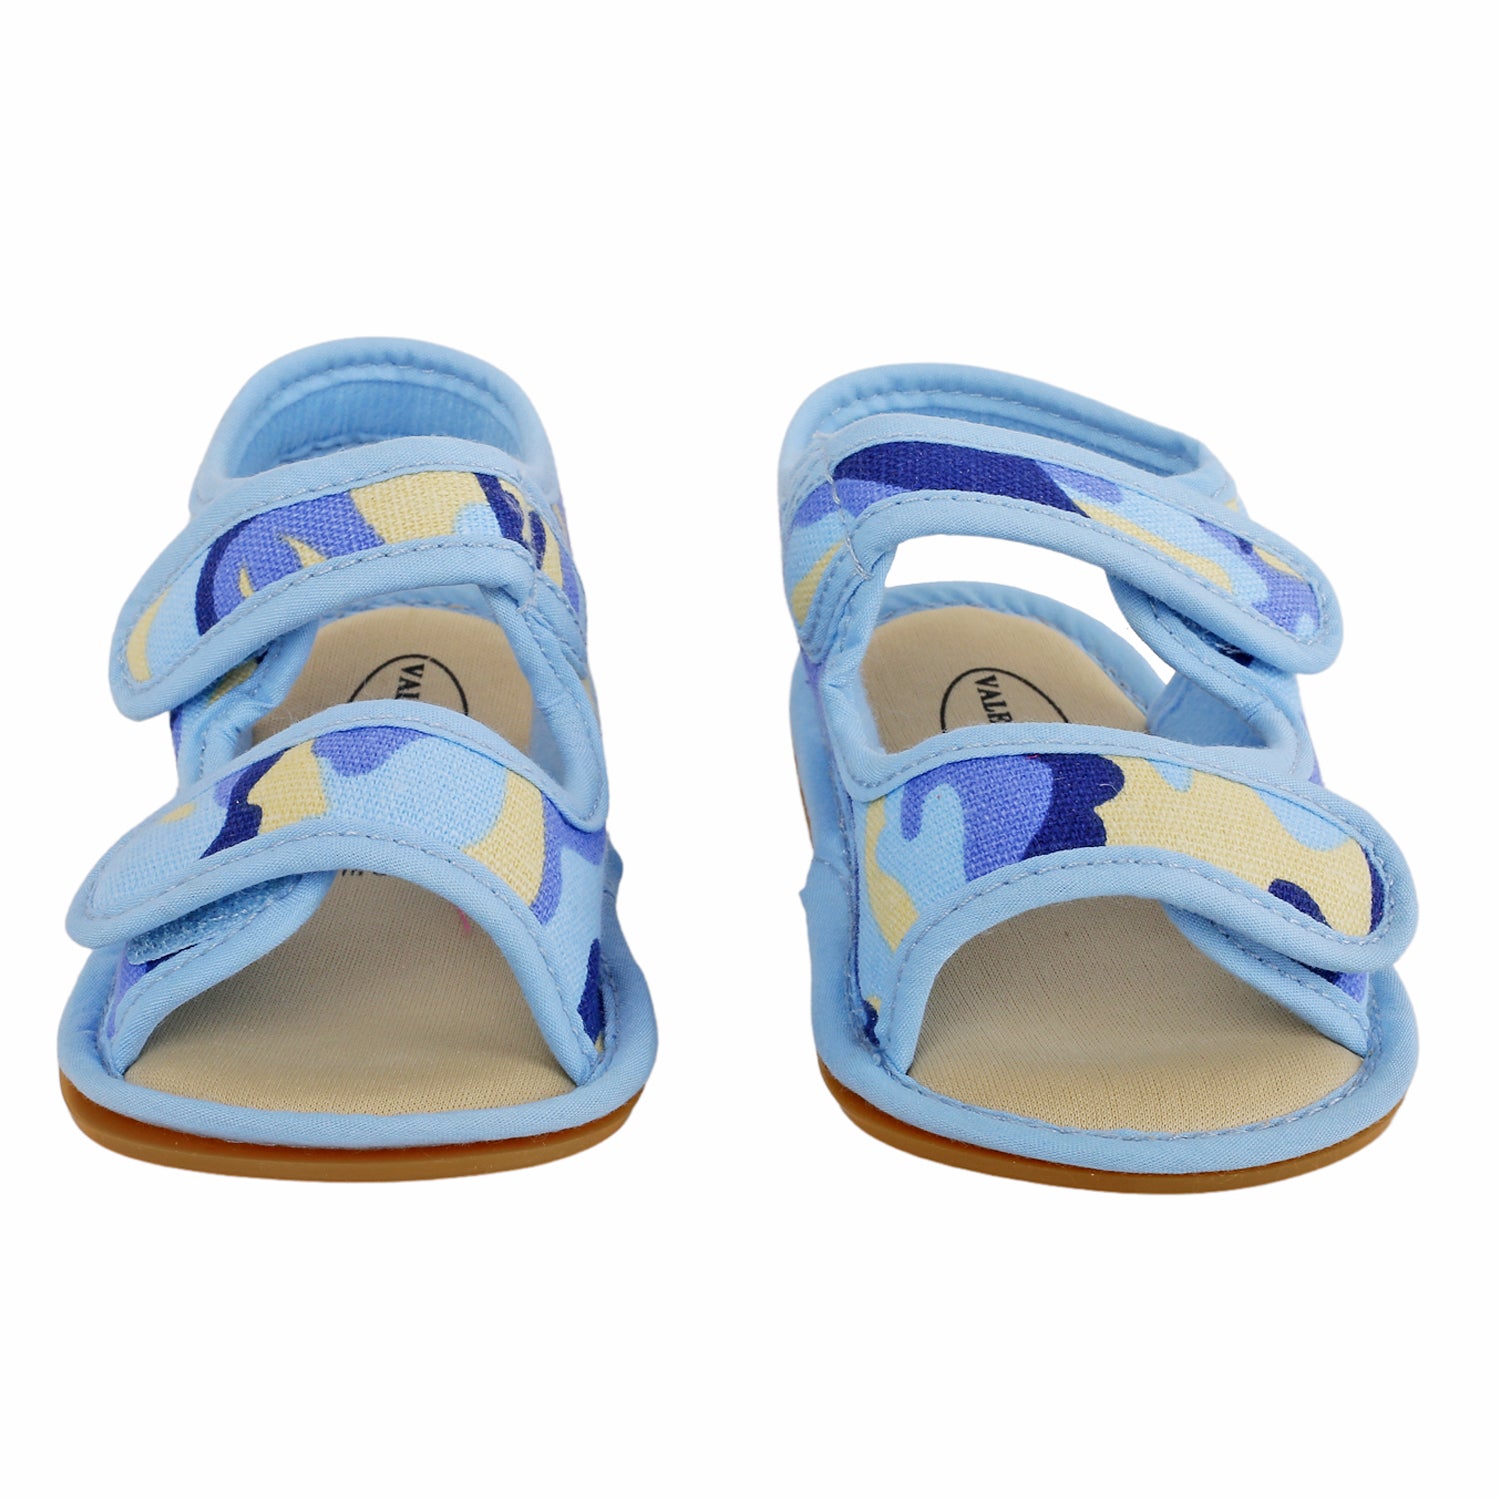 Baby Moo Camouflage Print Blue Open Toe Sandals